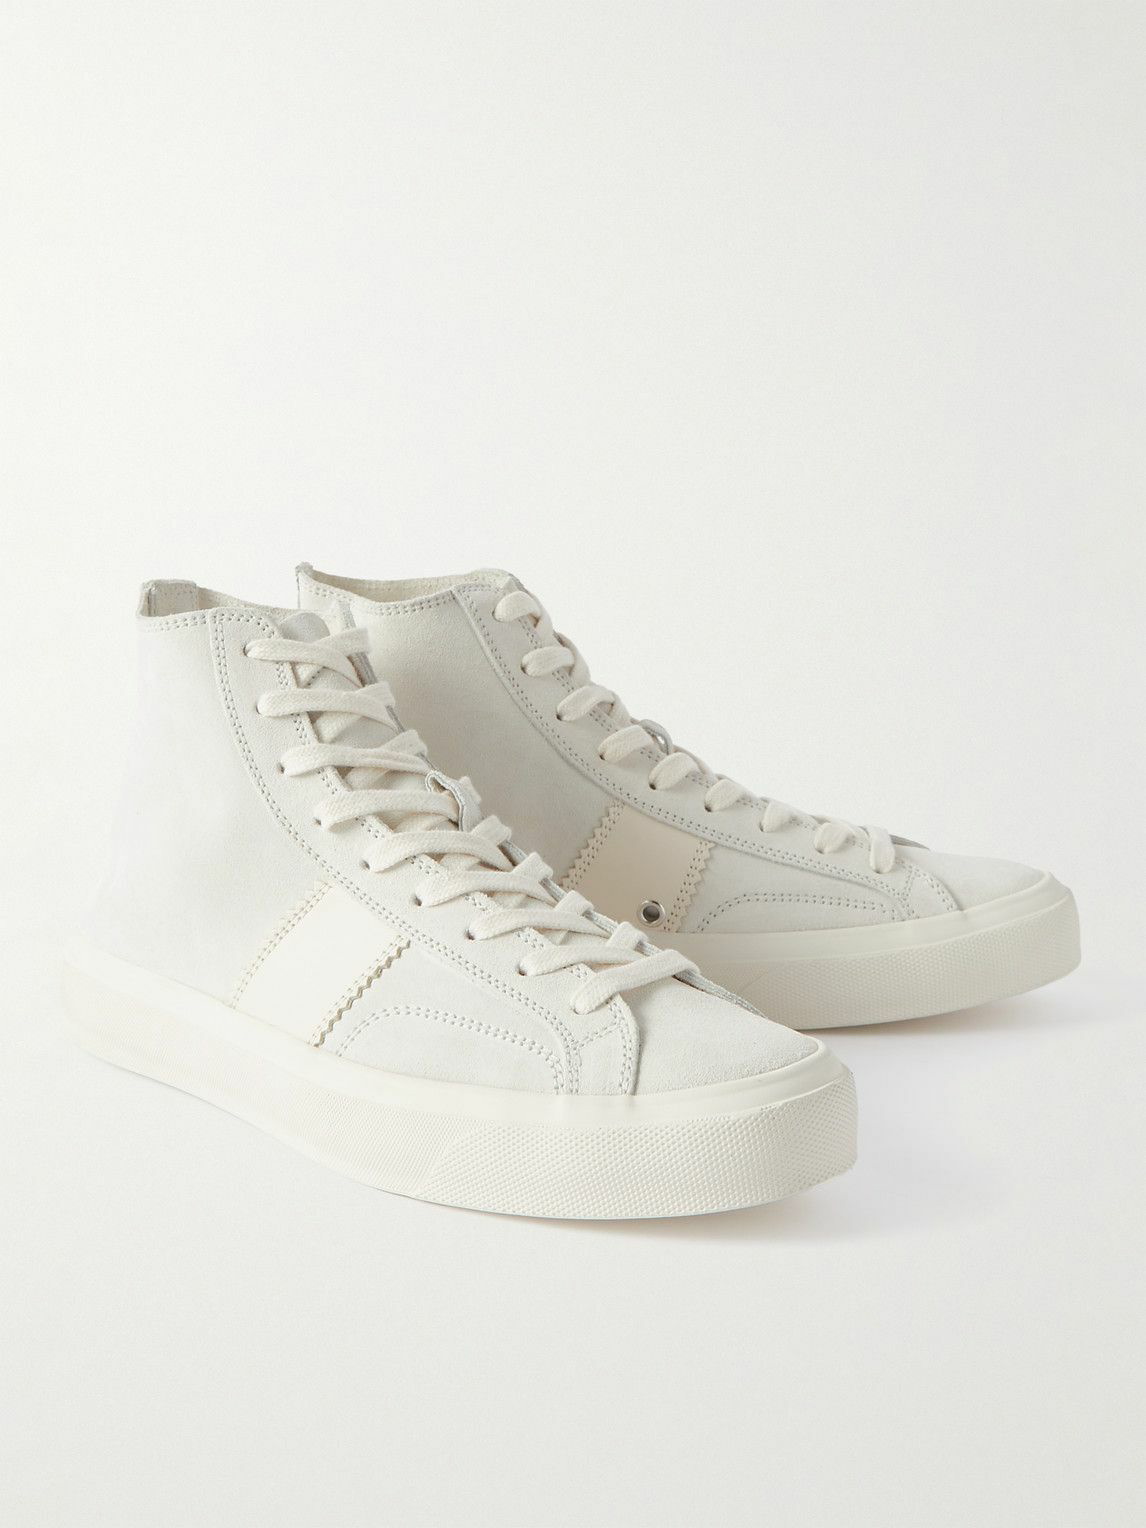 TOM FORD - Cambridge Leaher-Trimmed Suede High-Top Sneakers - White TOM ...